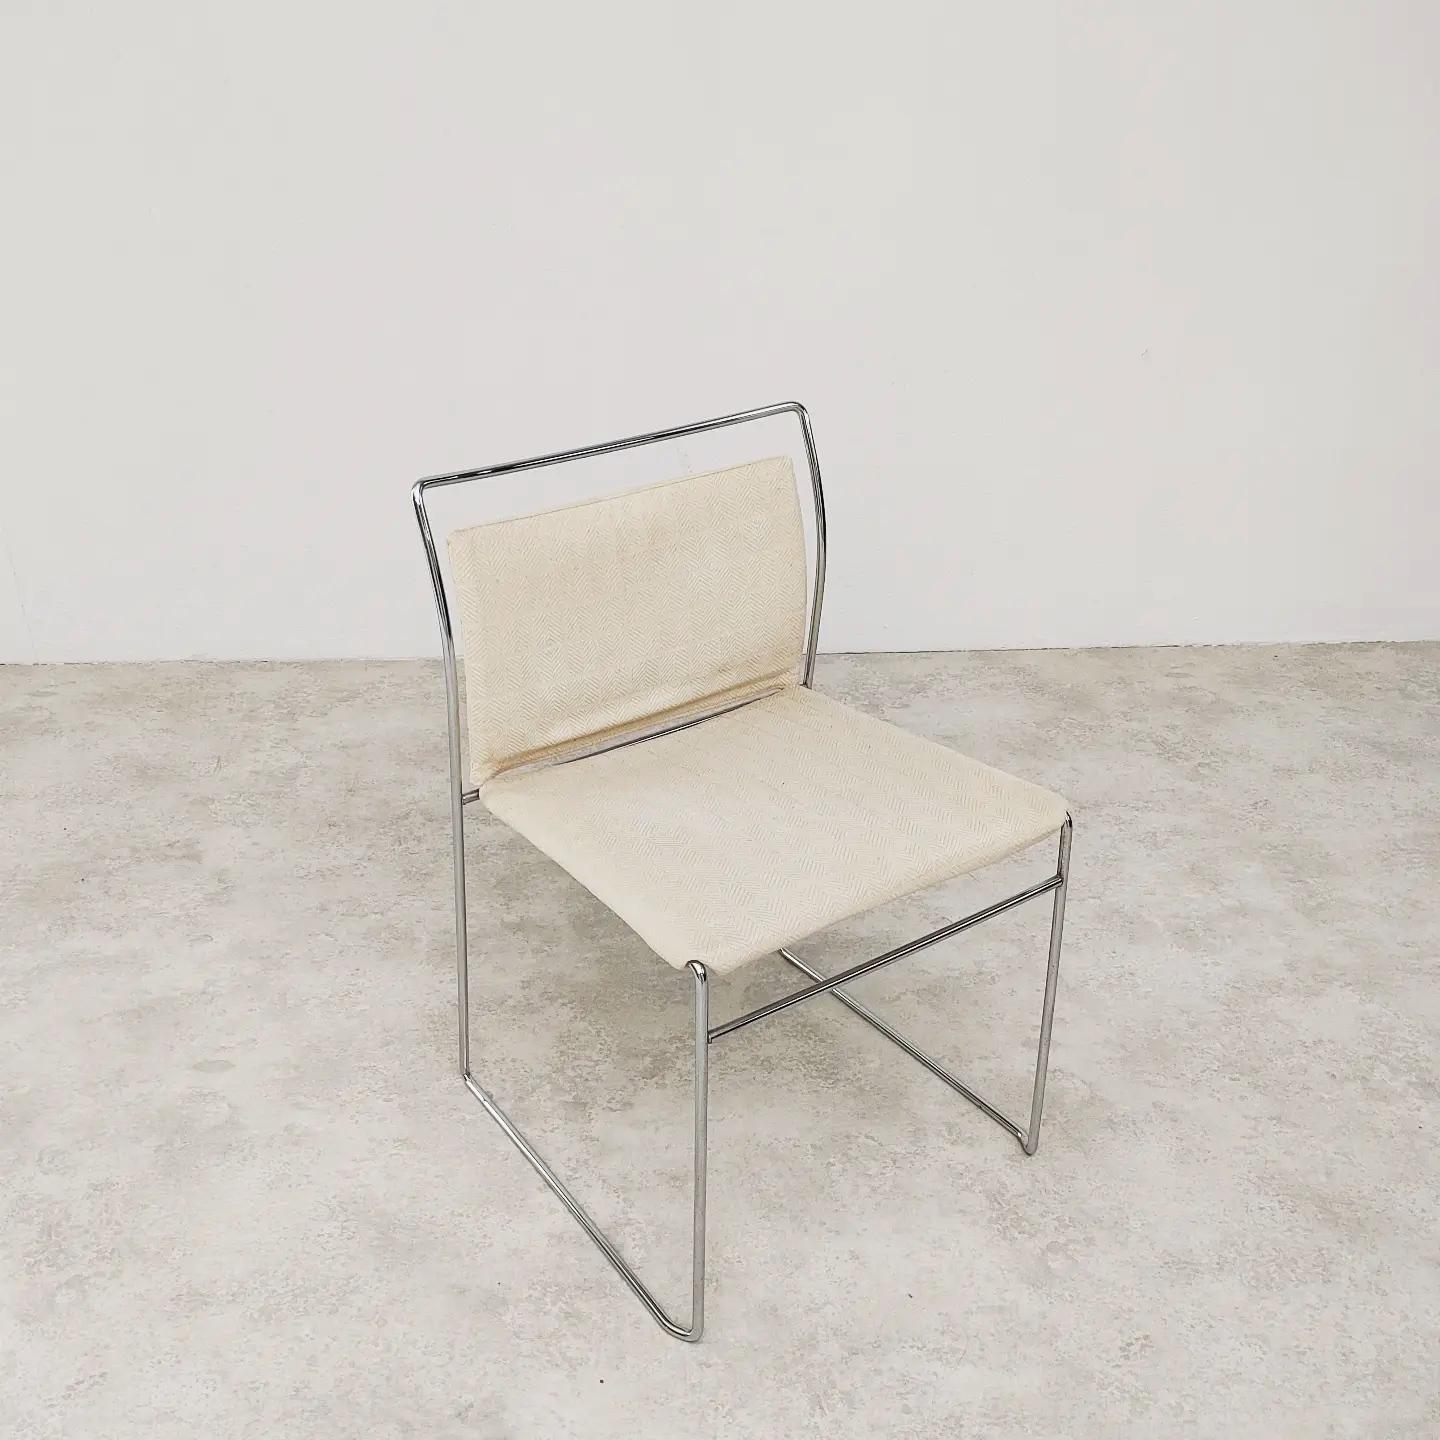 The TULU chair is a design by Kazuhide Takahama from 1968. Light, elegant and comfortable, the stackable chair remains to this day a typical example of the innovative minimal design approach taken by the Japanese architect in the late 1960s.

This